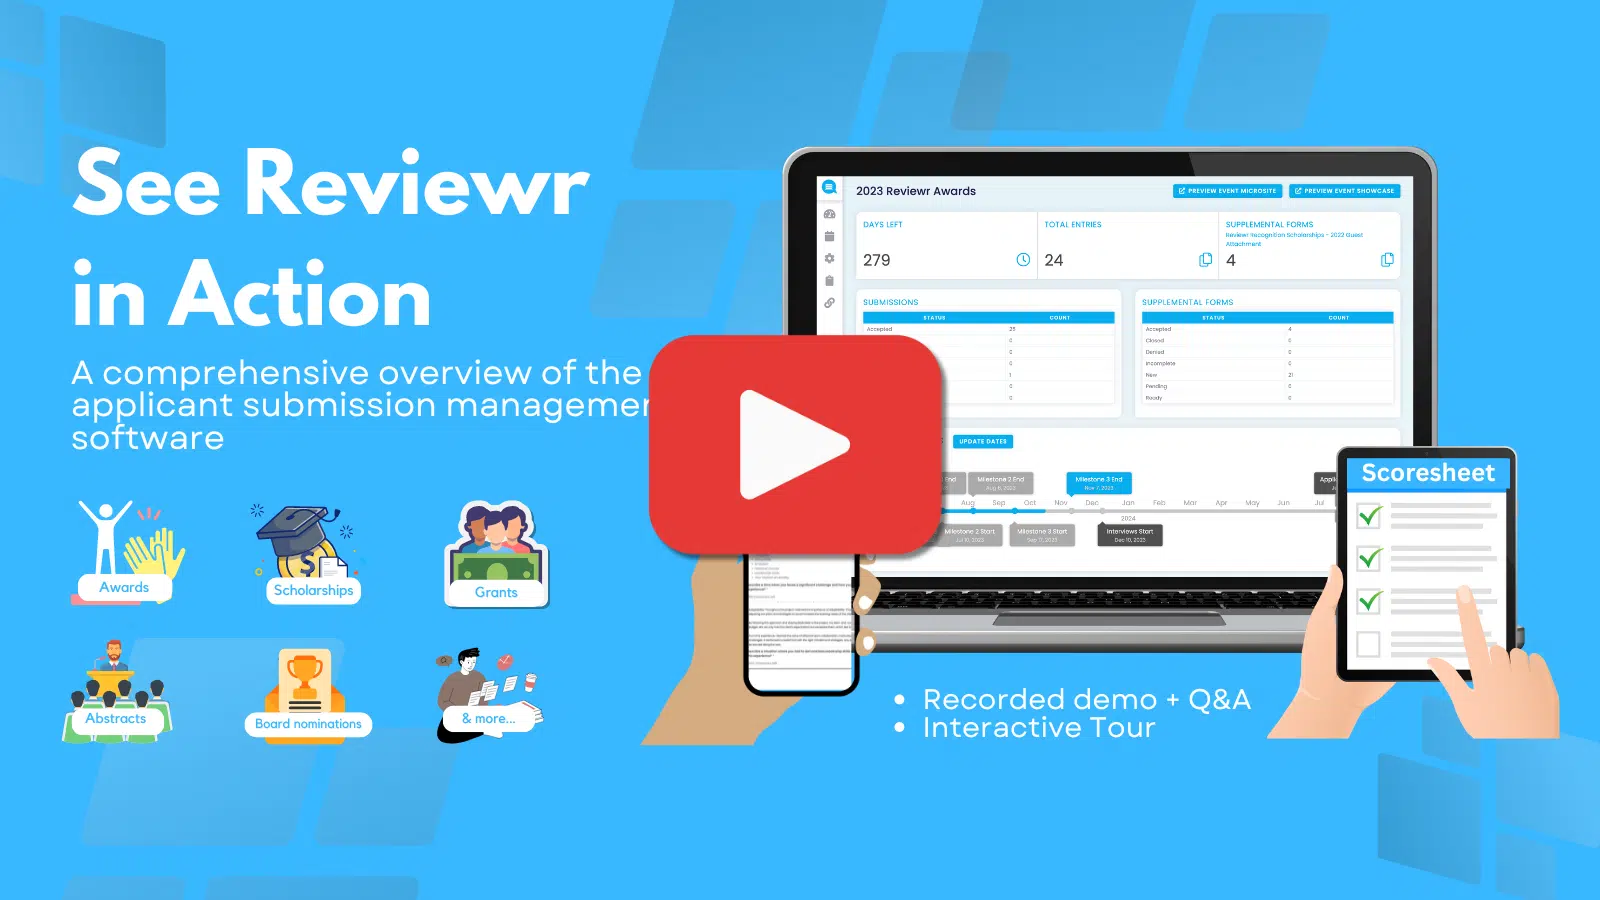 The Reviewr Demo is a comprehensive overview of the Reviewr software in action outlining all the features Reviewr has to offer.